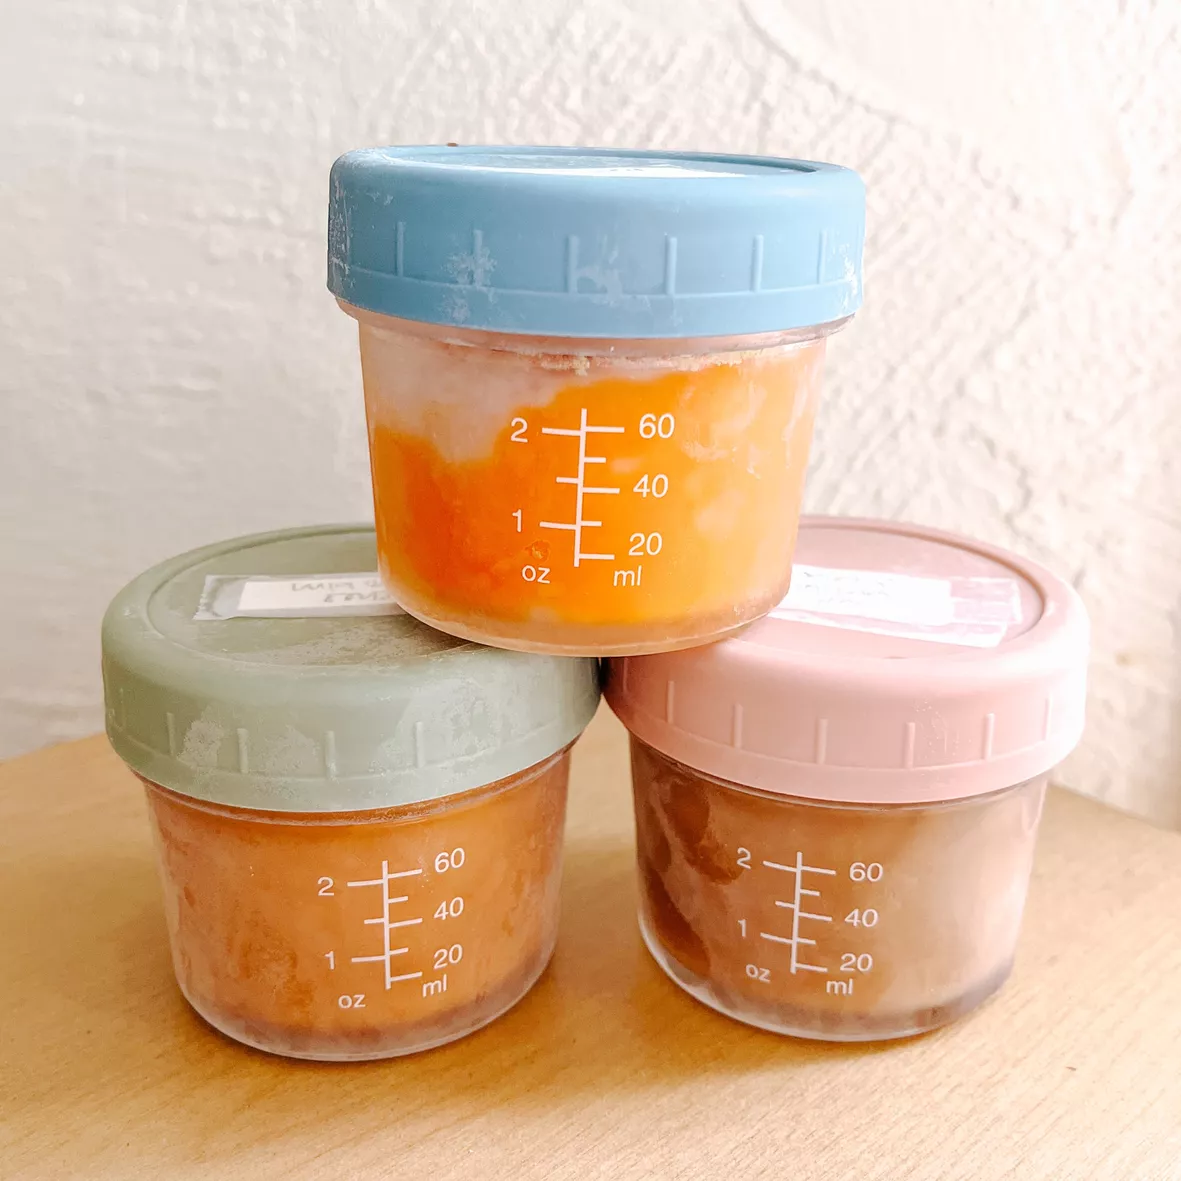 WeeSprout Glass Baby Food Storage Containers | Set of 12 | 4 oz Glass Baby Food Jars with Lids | Freezer Storage | Reusable Small Glass